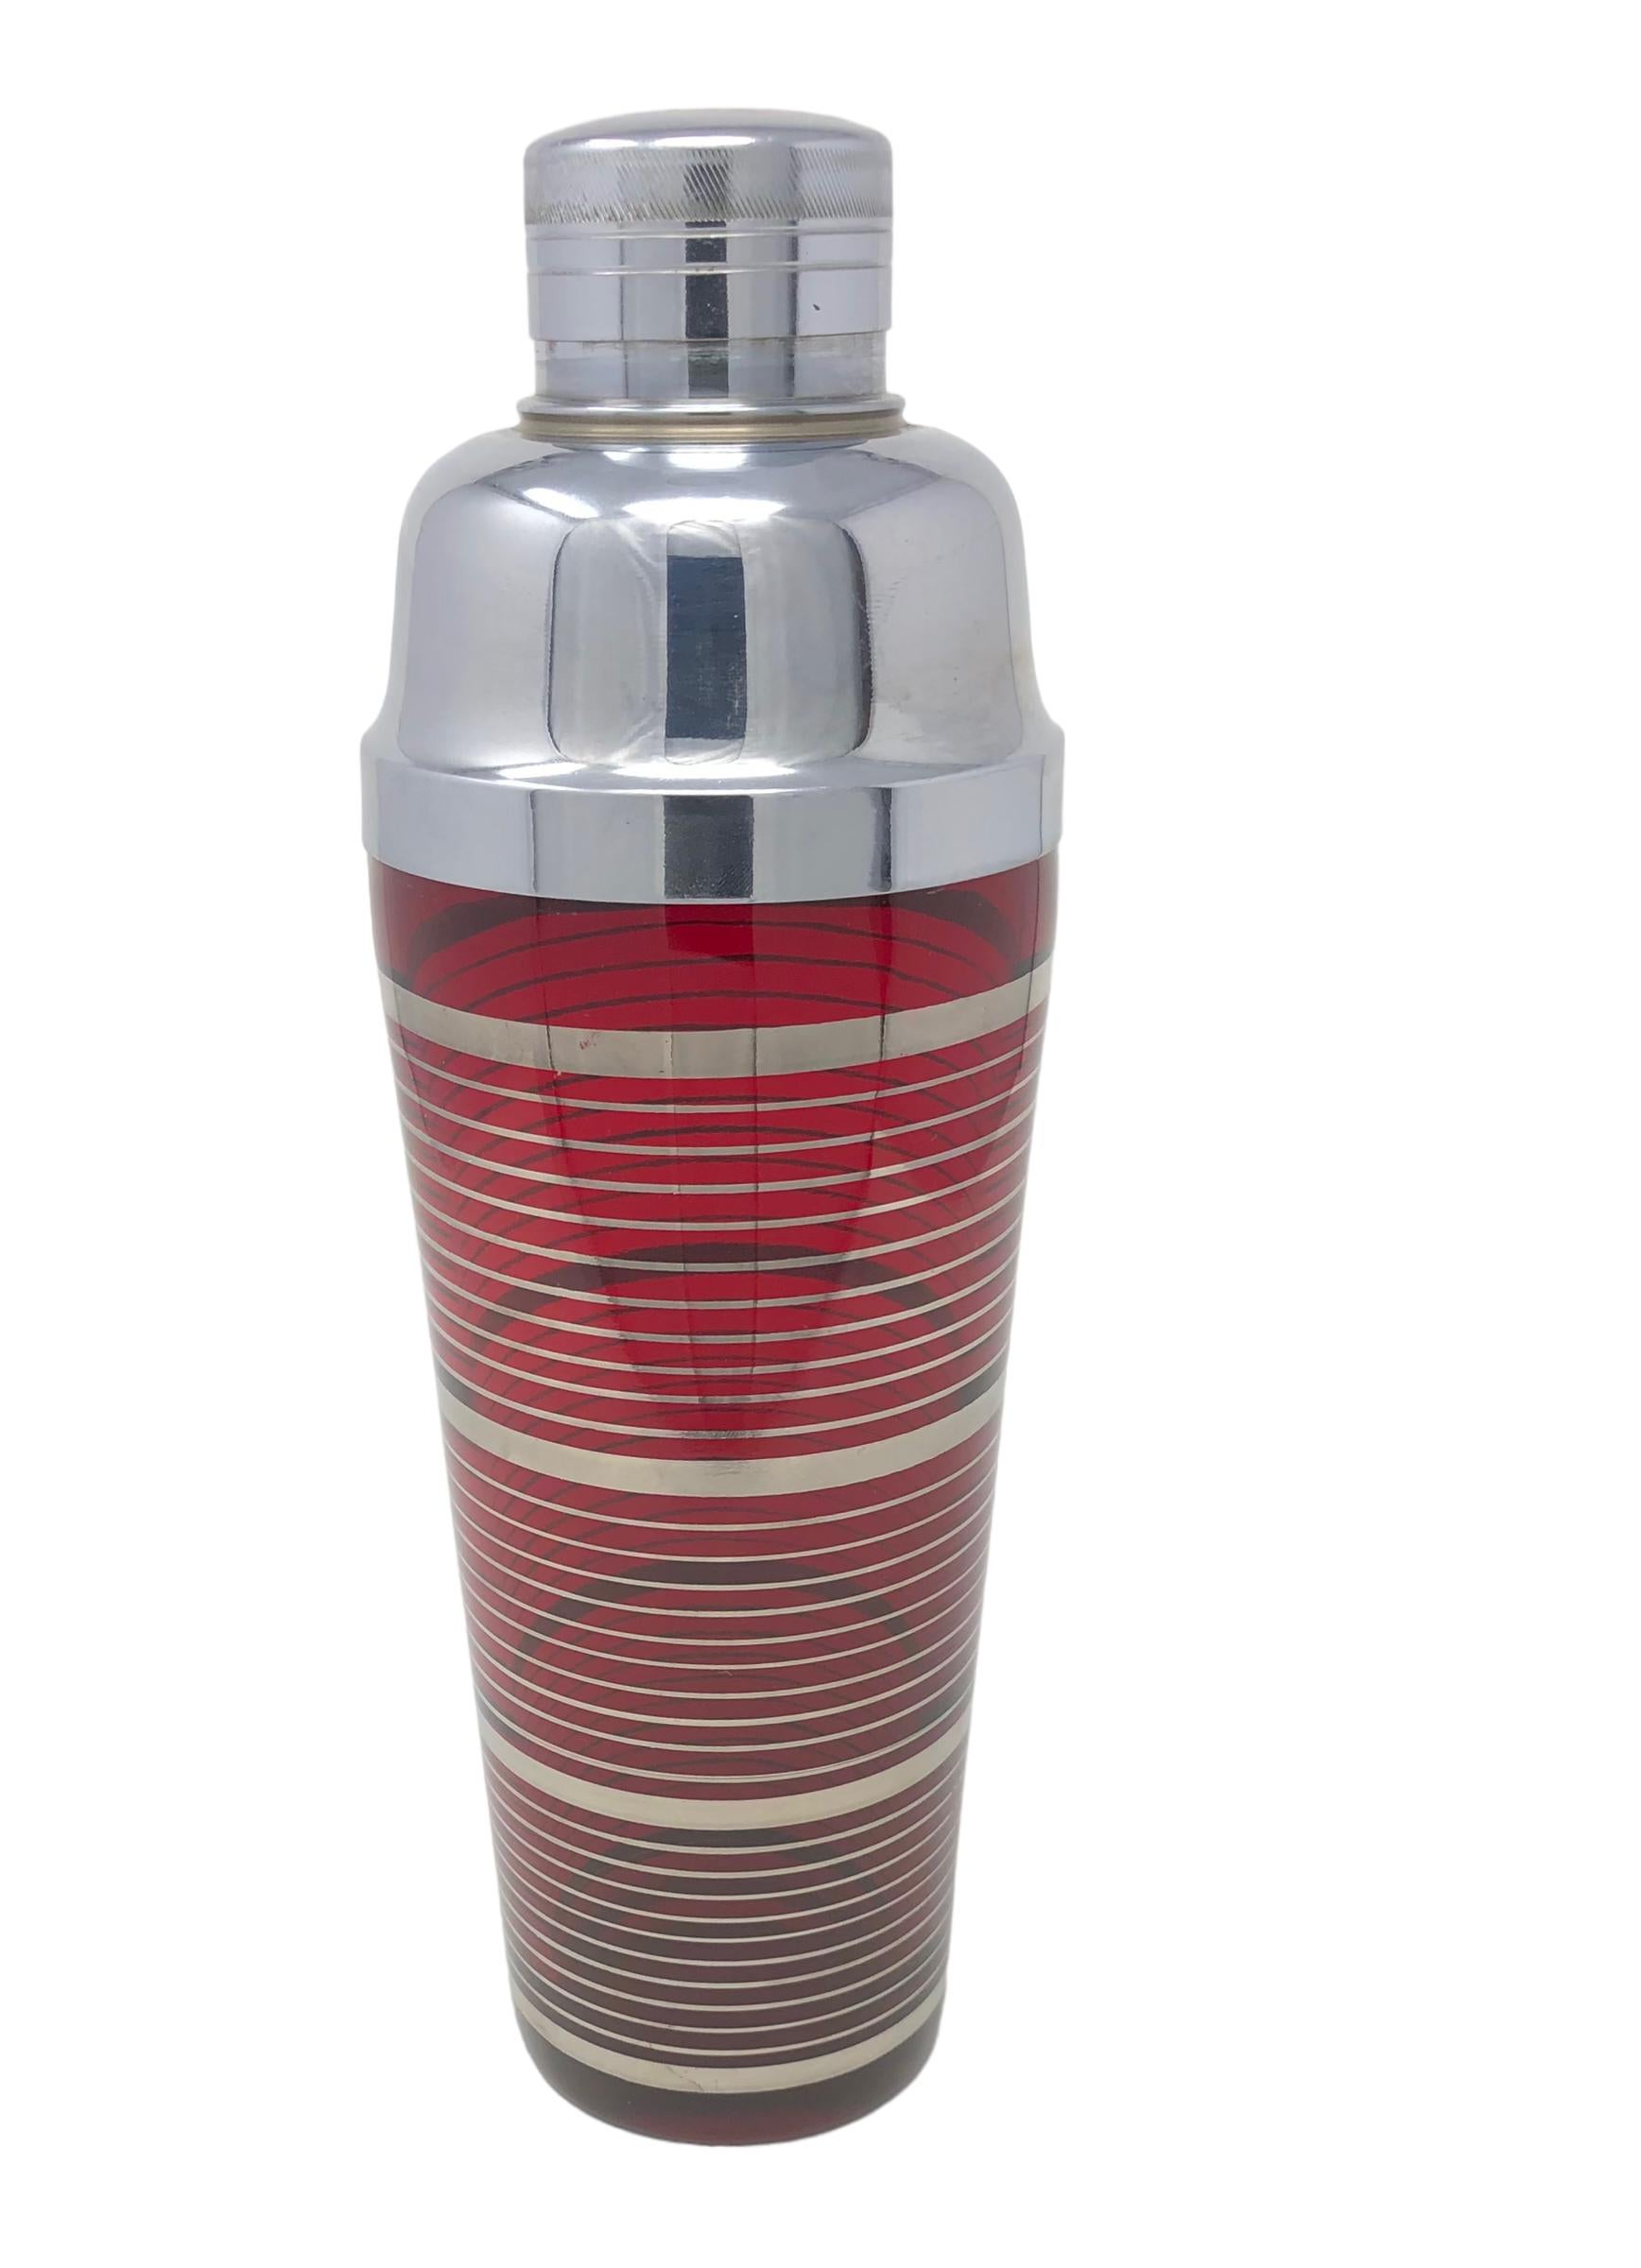 Art Deco Ruby Red Cocktail Shaker With Silver Bands And Chrome Lid For Sale 2